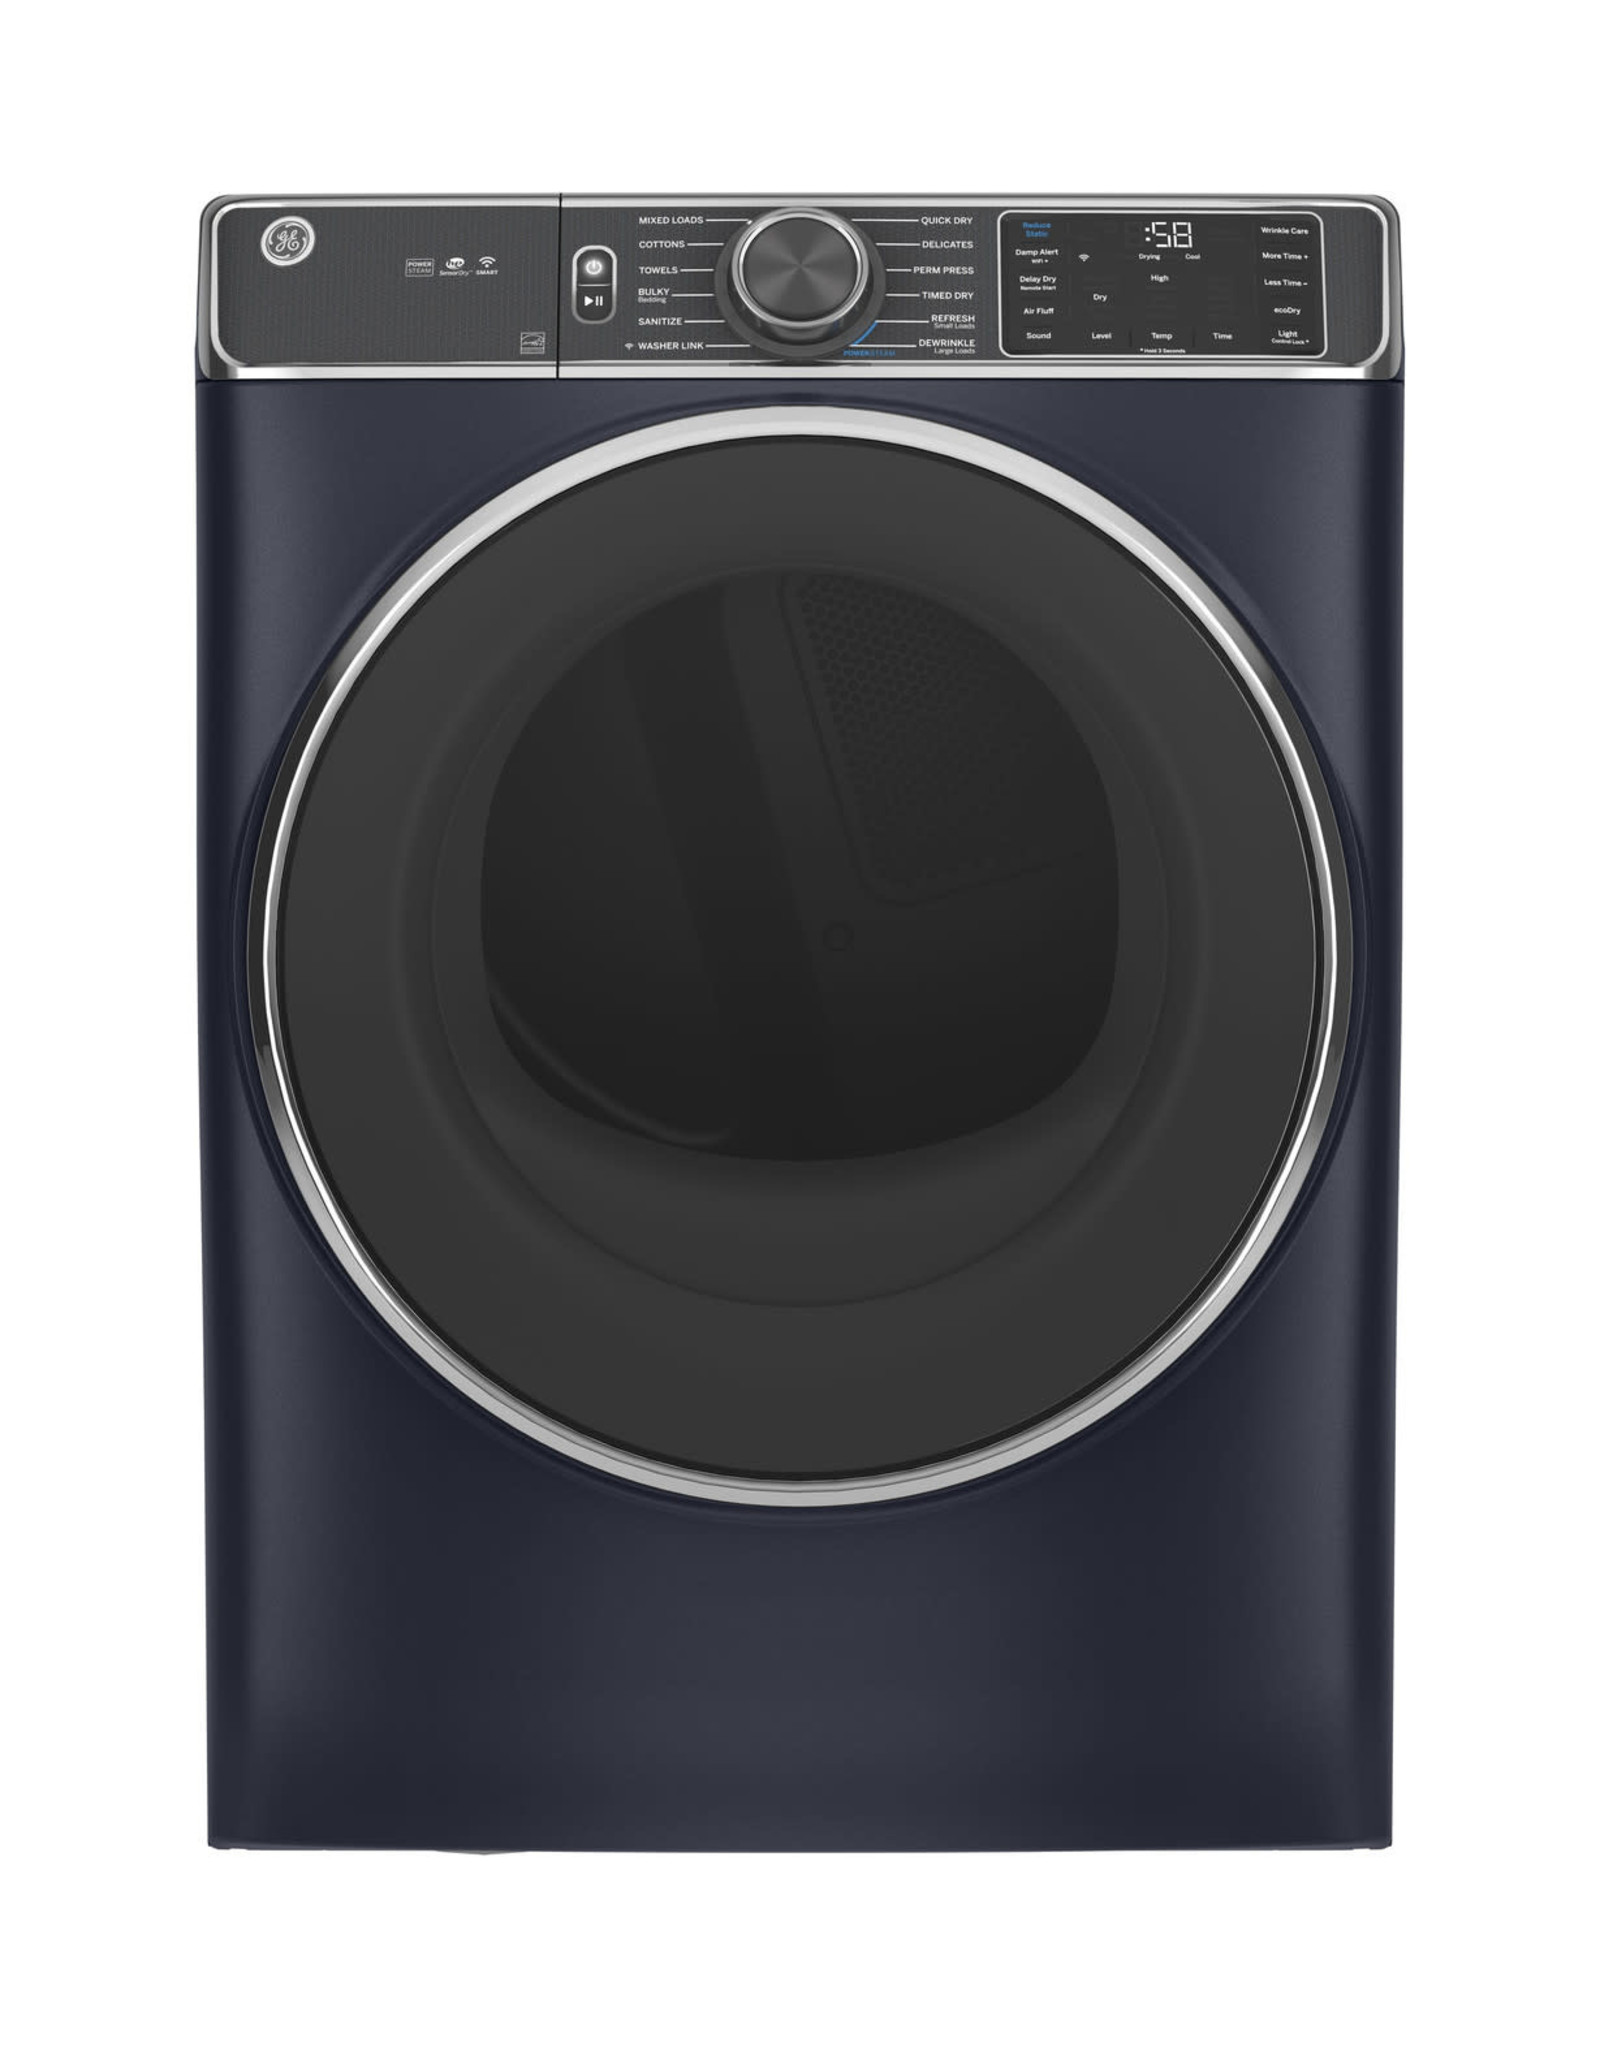 GFD55ESPNDG <a href="/cdn-cgi/l/email-protection" class="__cf_email__" data-cfemail="10575550273e28">[email protected]</a> cu. ft. Capacity Smart Front Load Electric Dryer with Steam and Sanitize Cycle